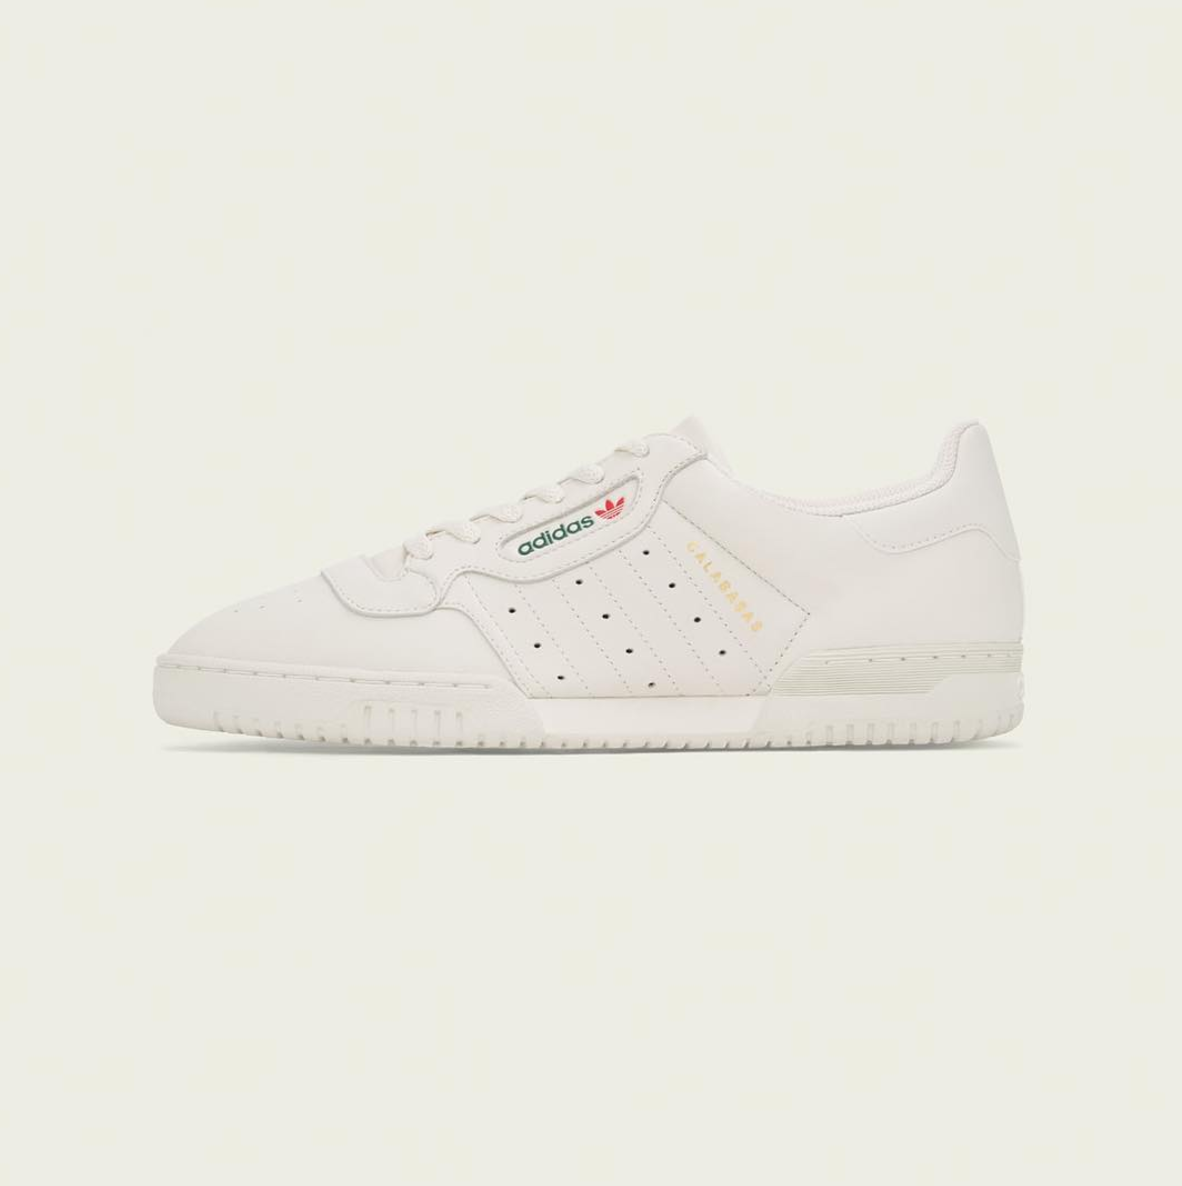 Adidas Announce YEEZY Powerphase As A US Exclusive Release